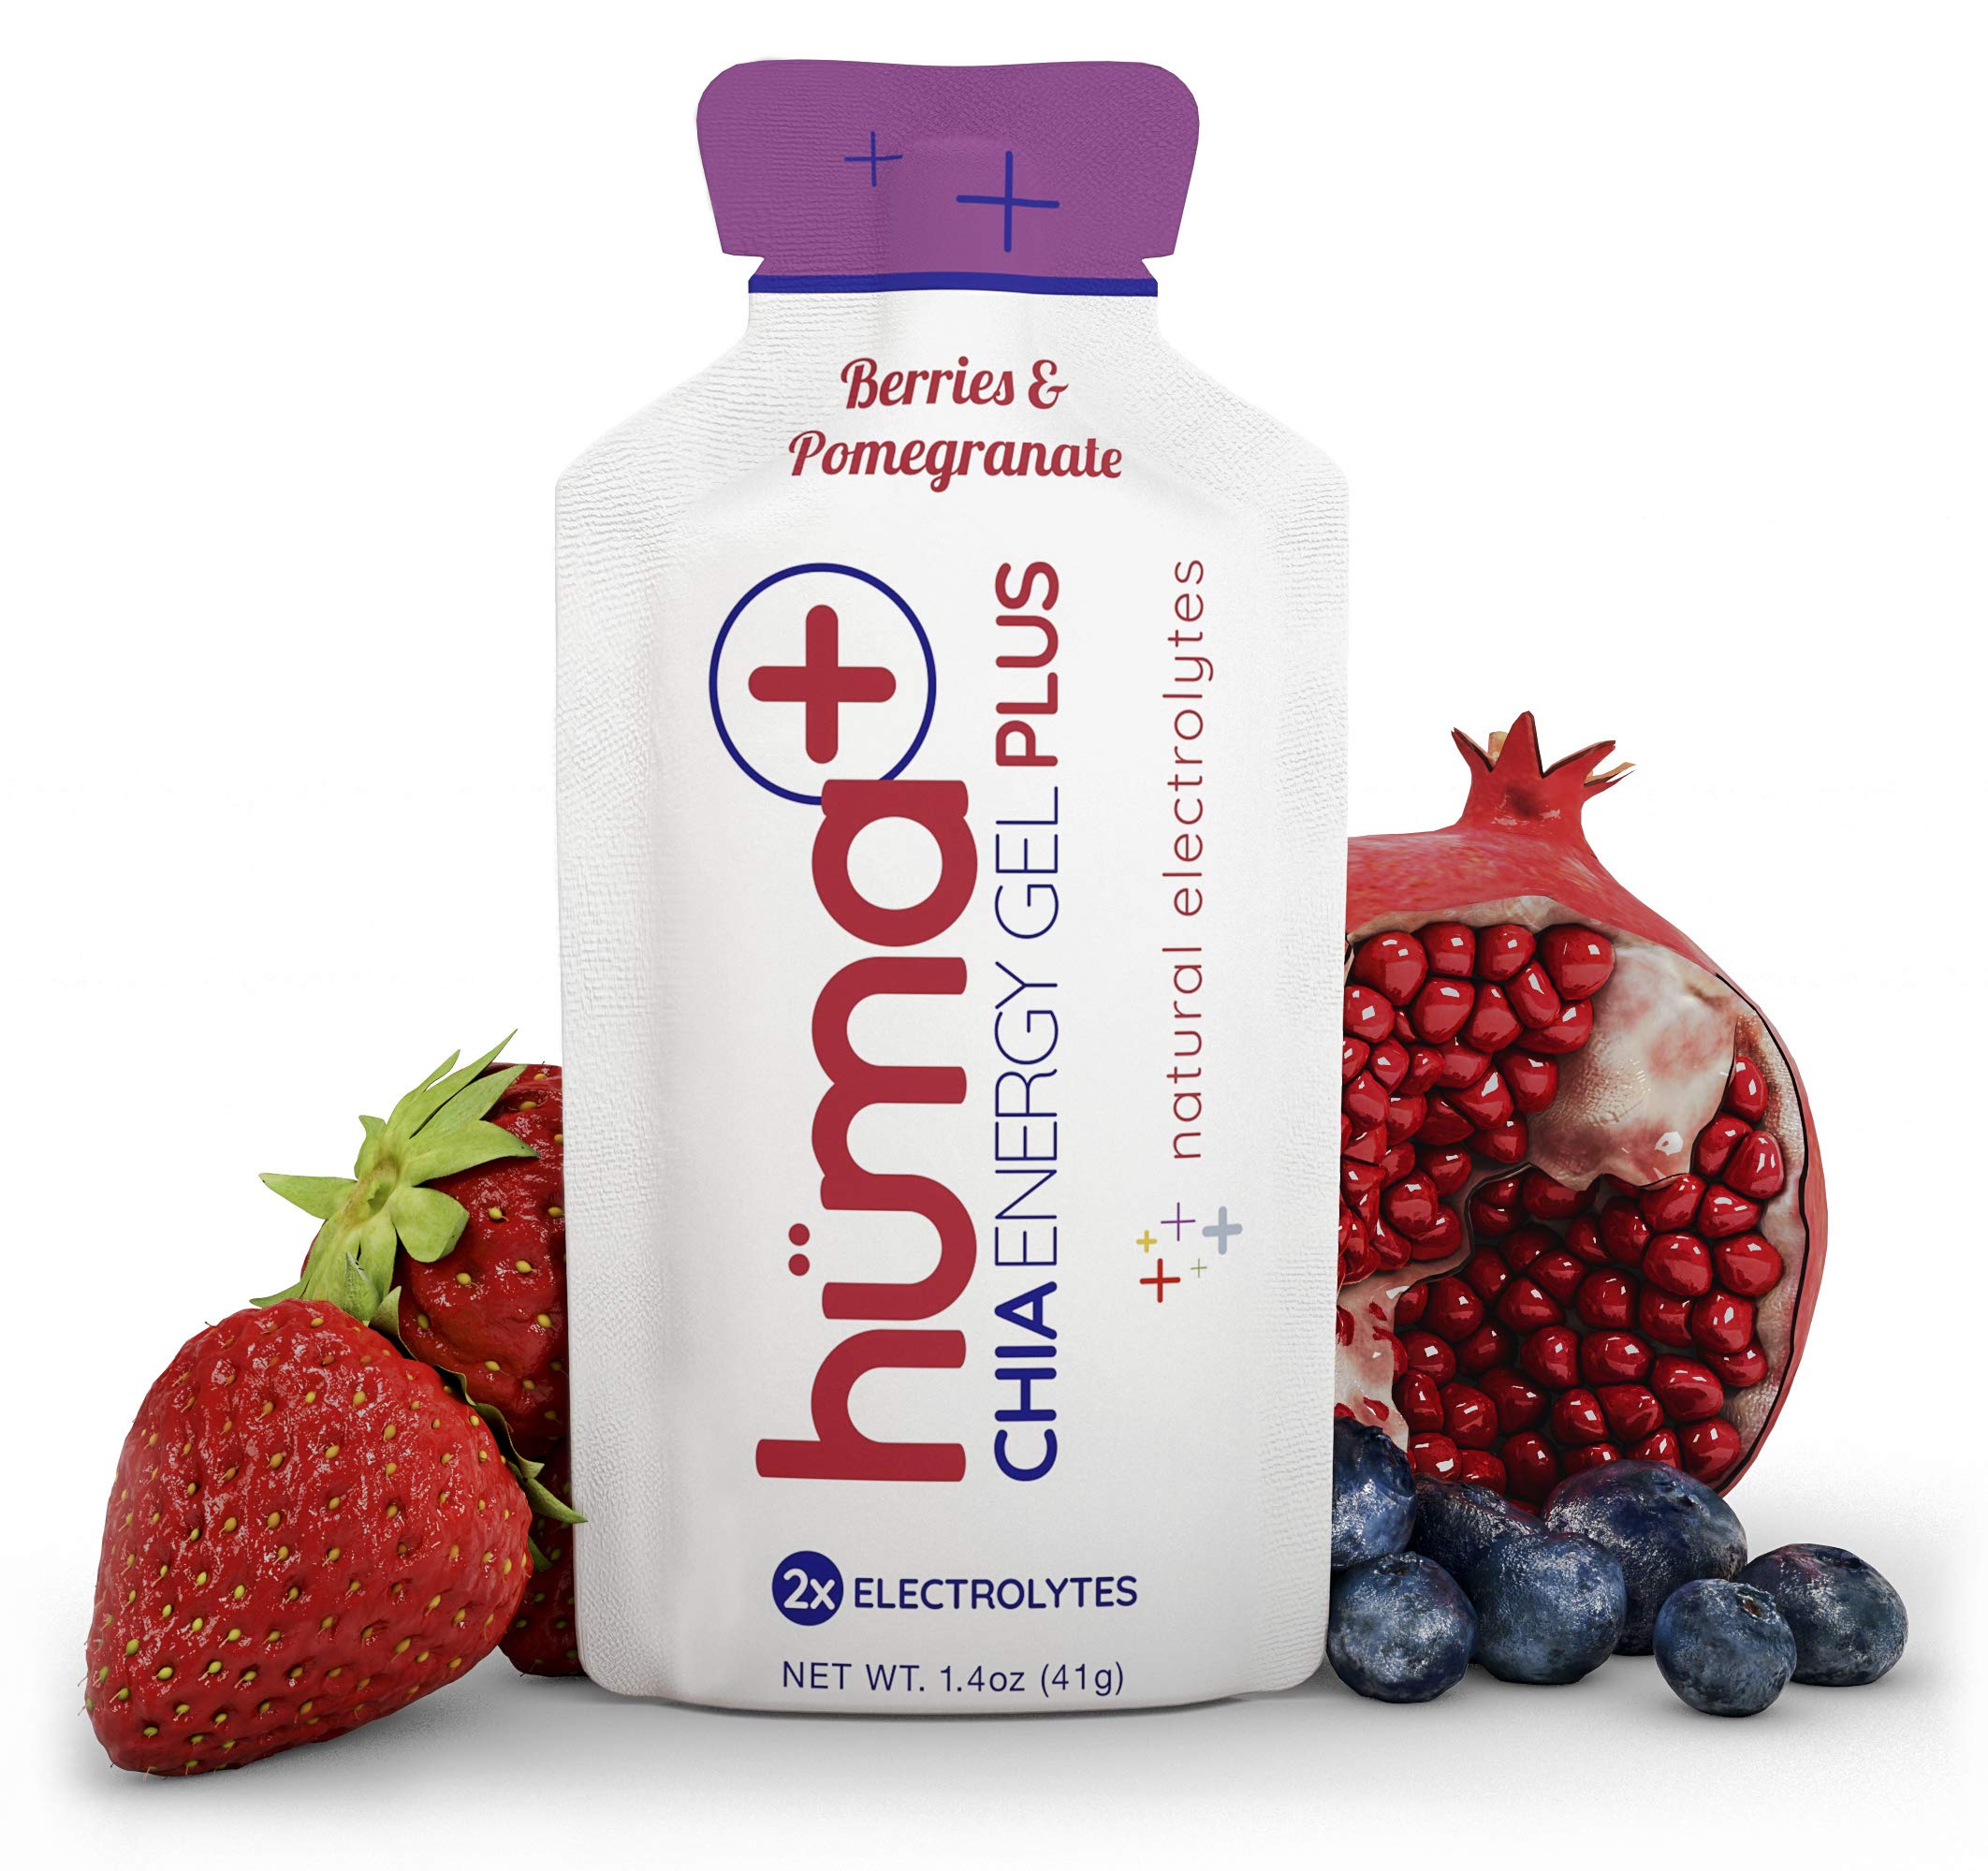 Huma Plus (Double Electrolytes) - Chia Energy Gel, Berries & Pomegranate, 24 Gels - Stomach Friendly, Real Food Energy Gels